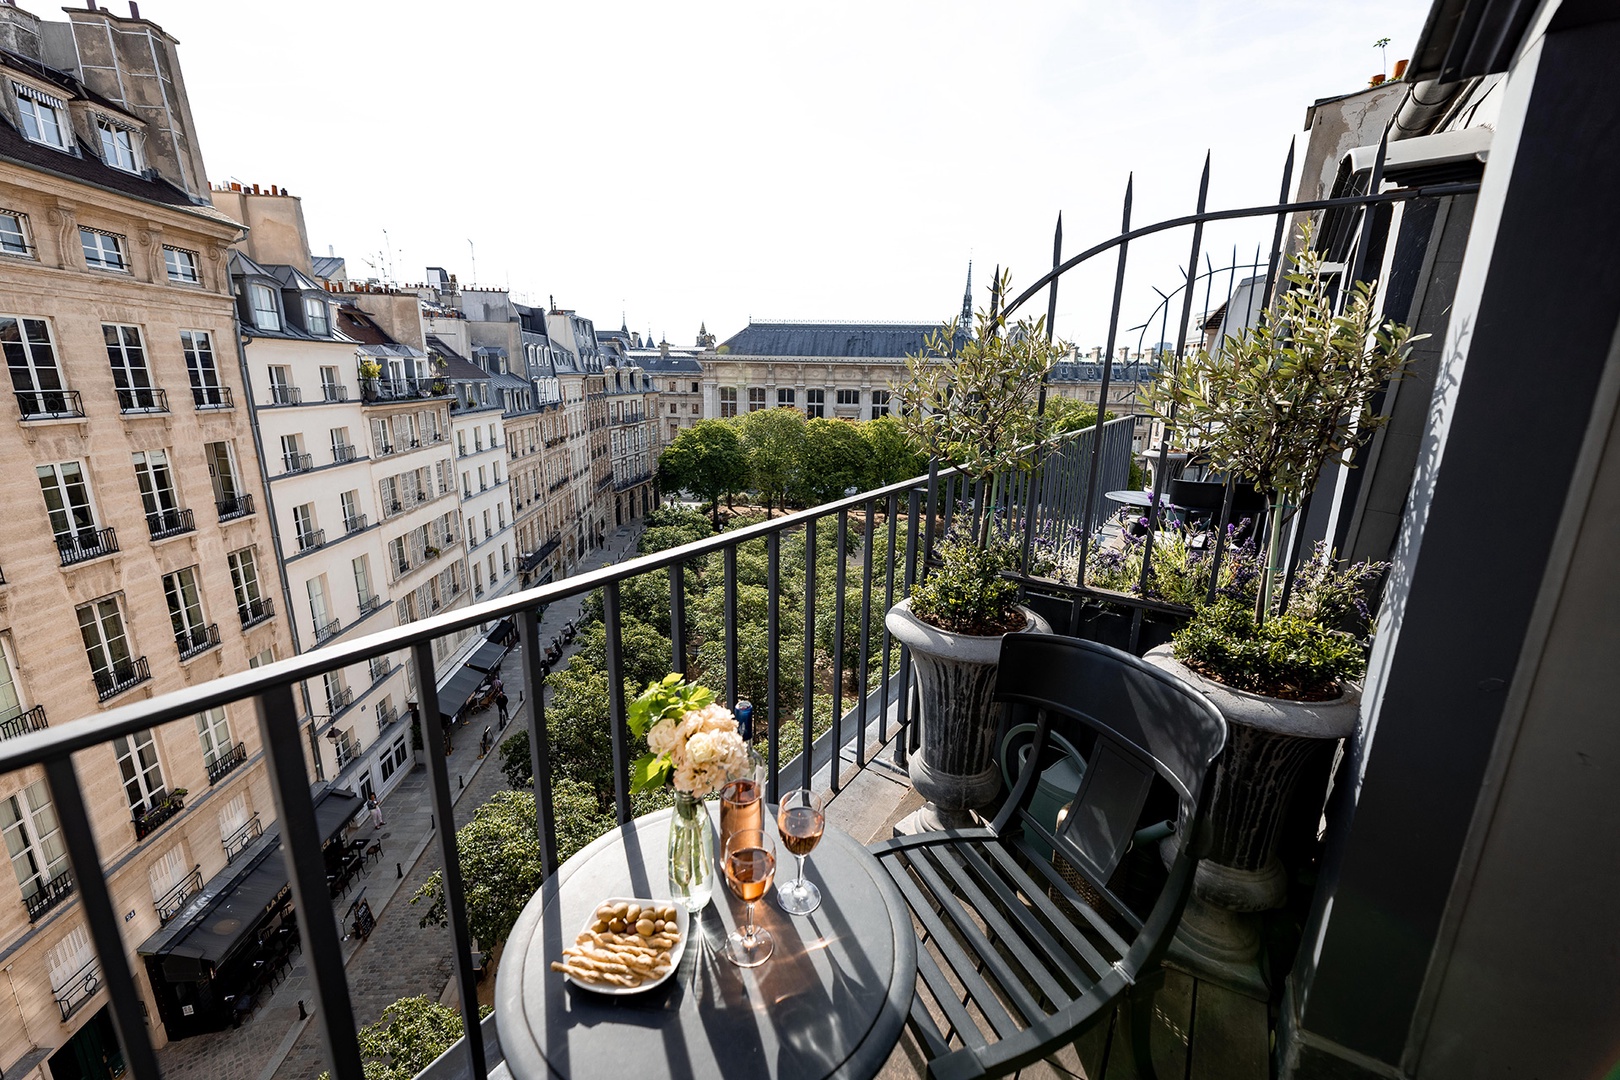 Enjoy your private balcony overlooking the lovely Place Dauphine.